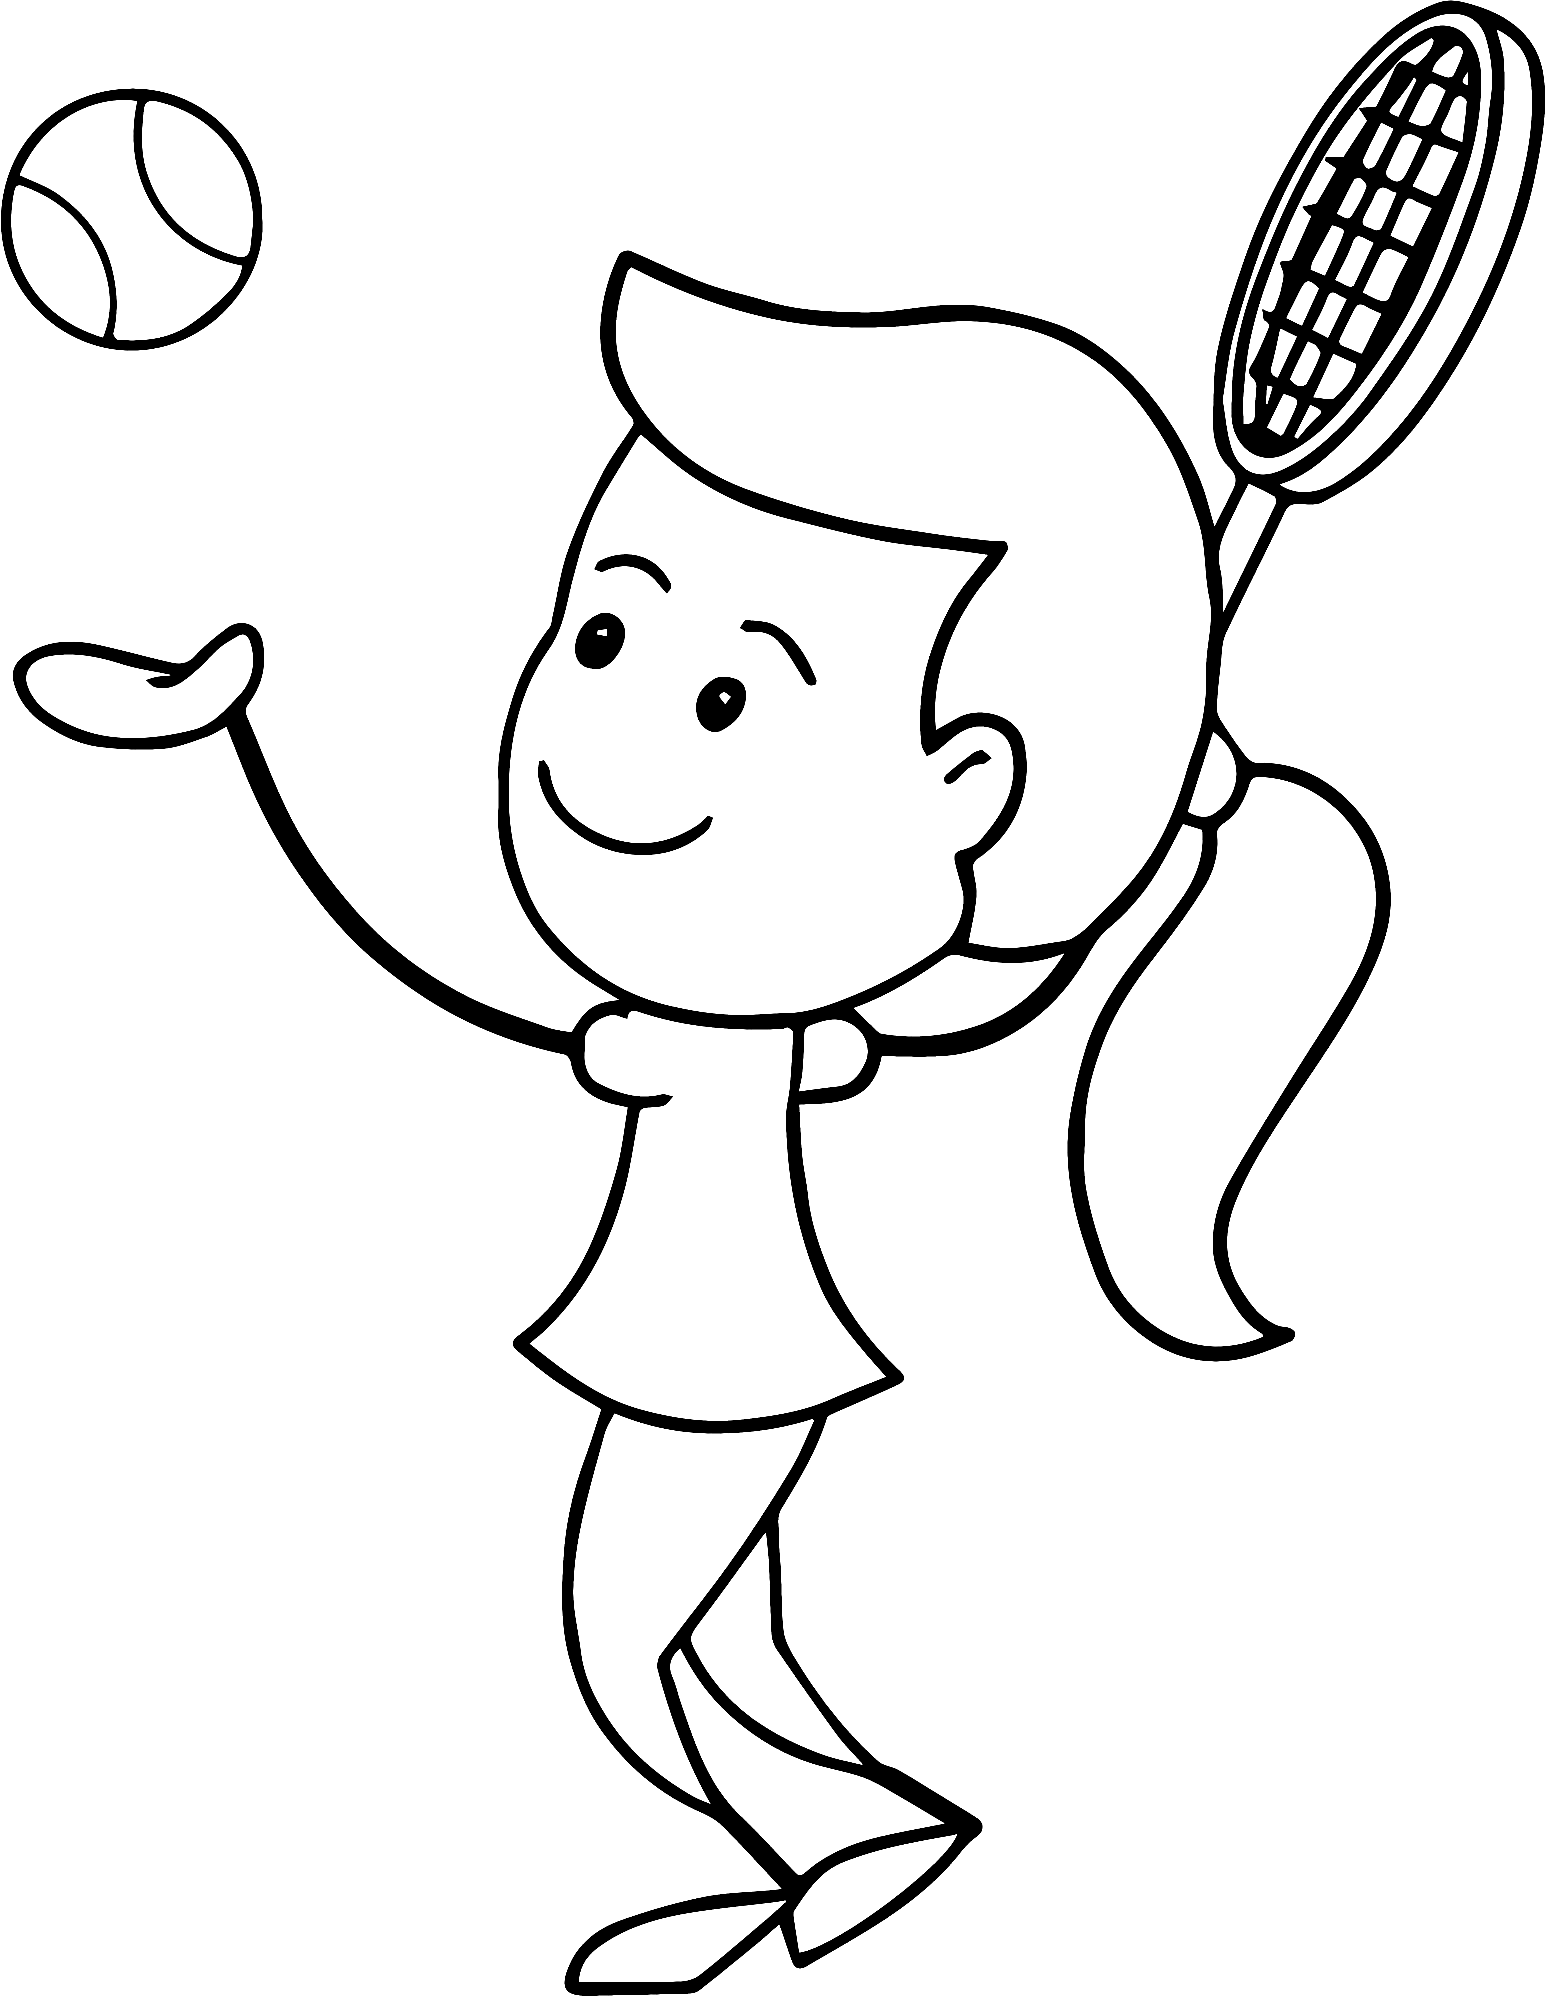 Girl Serving Tennis Ball Coloring Pages